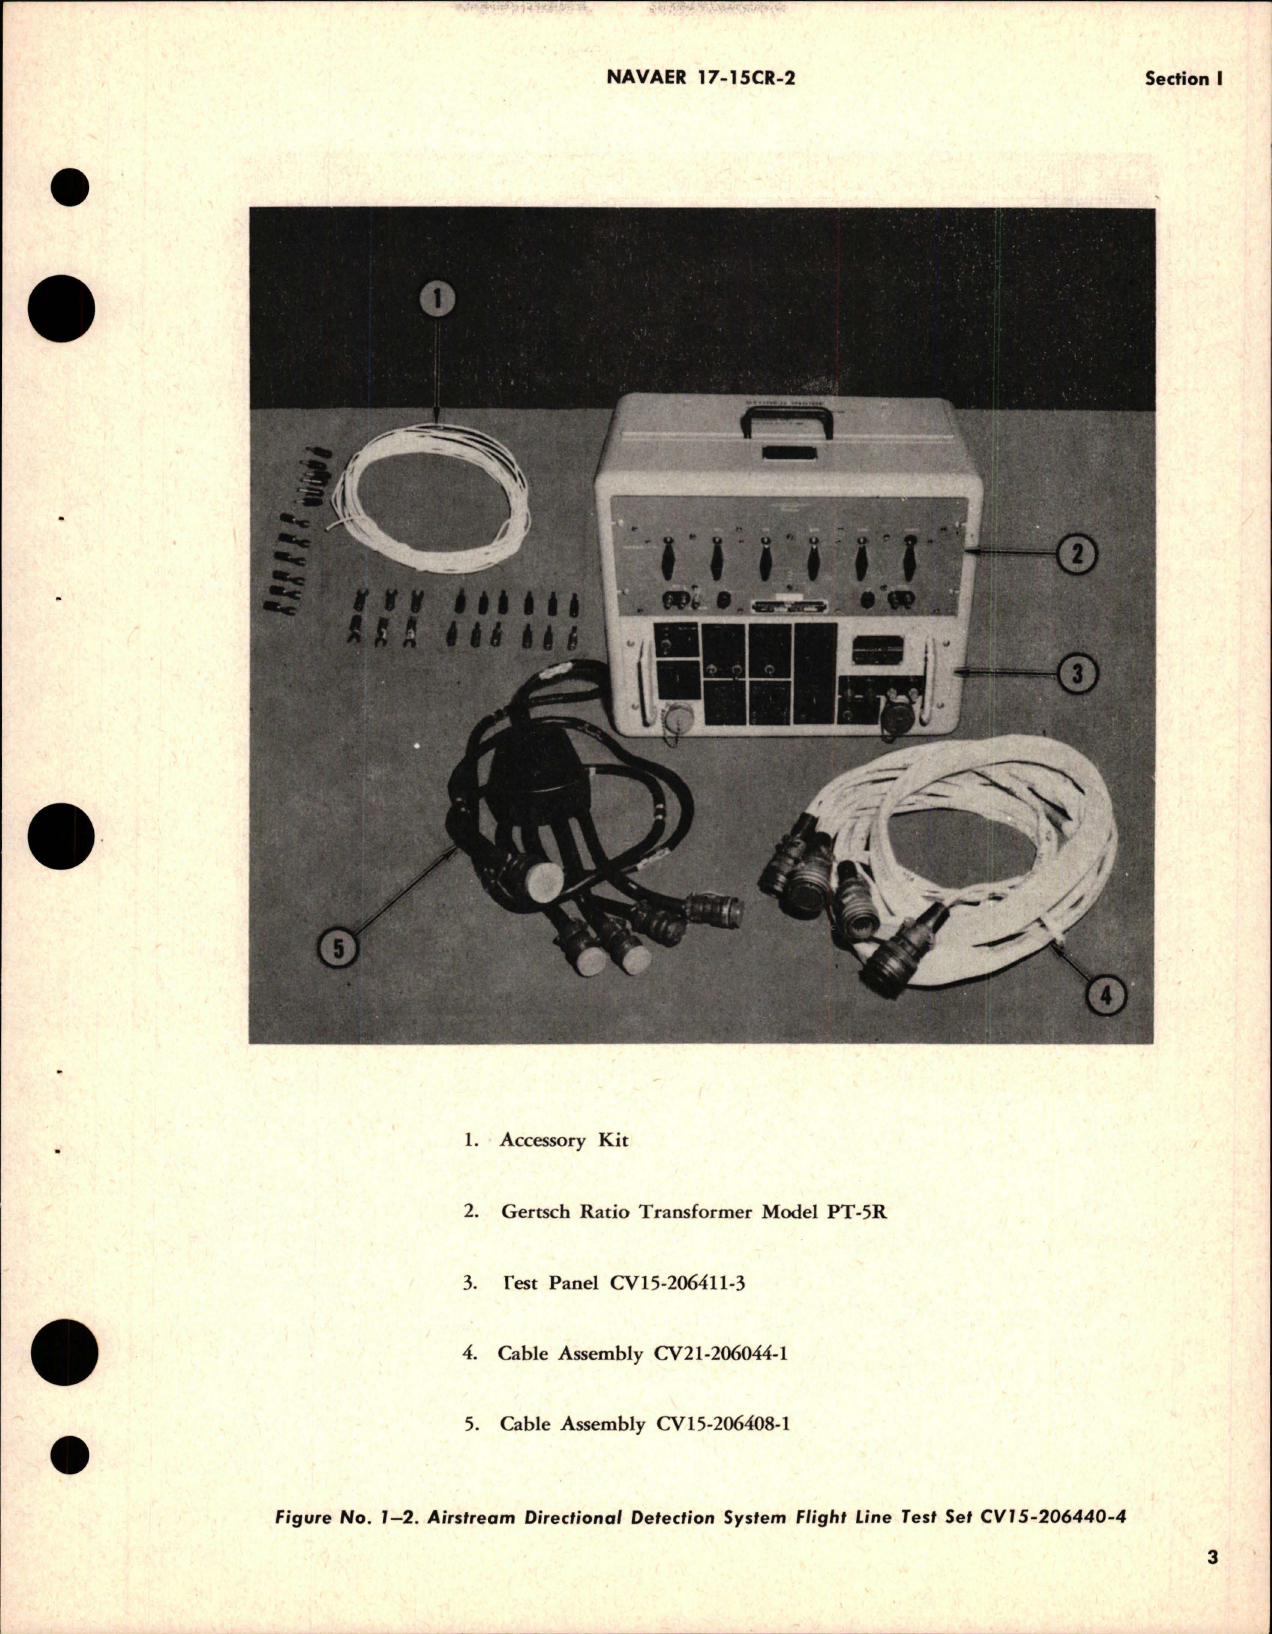 Sample page 7 from AirCorps Library document: Operation and Service Instructions with Illustrated Parts for Airstream Directional Detection System Flight Line Test Sets - CV15-206440-1, CV15-206440-4